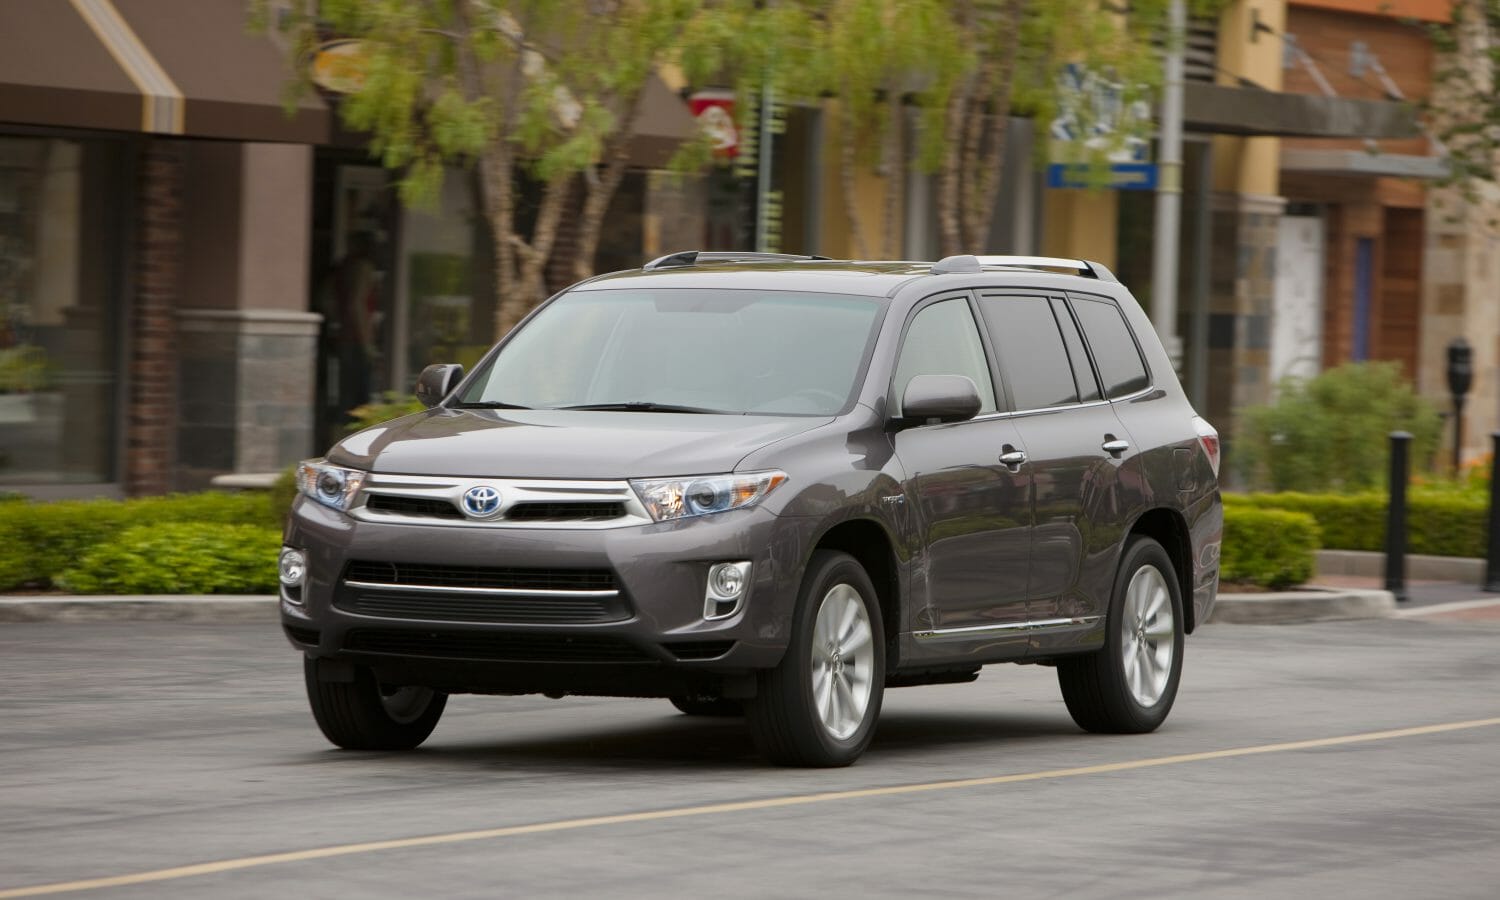 2011 Toyota Highlander Review: A Midsize SUV That Outlasts The Competition